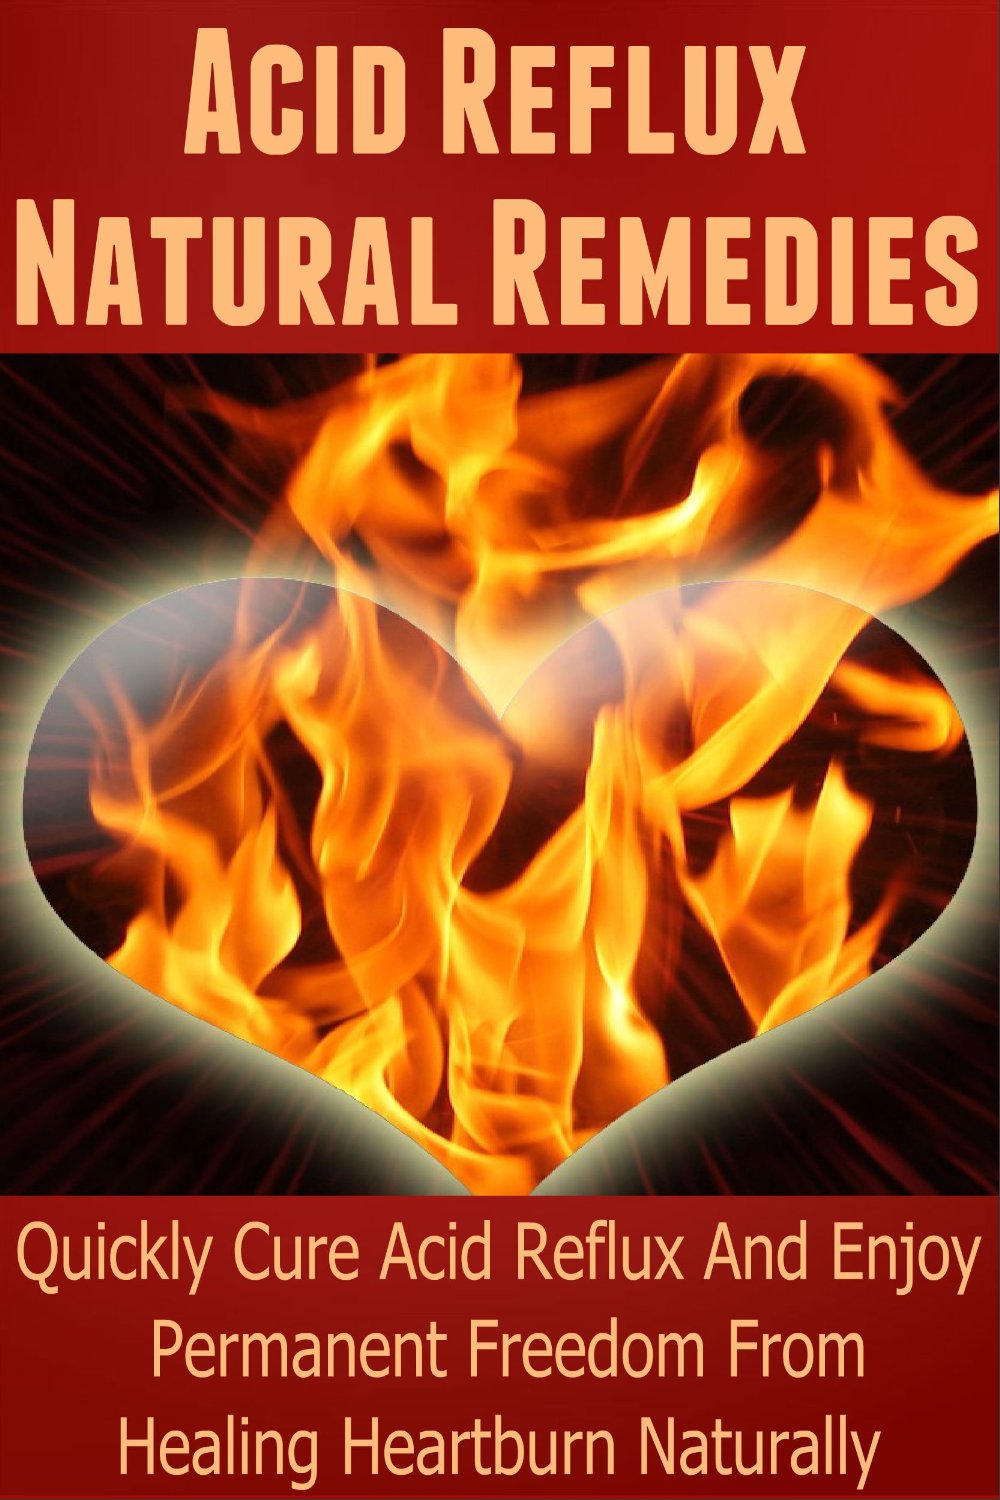 Acid Reflux Natural Remedies by Julia Wright